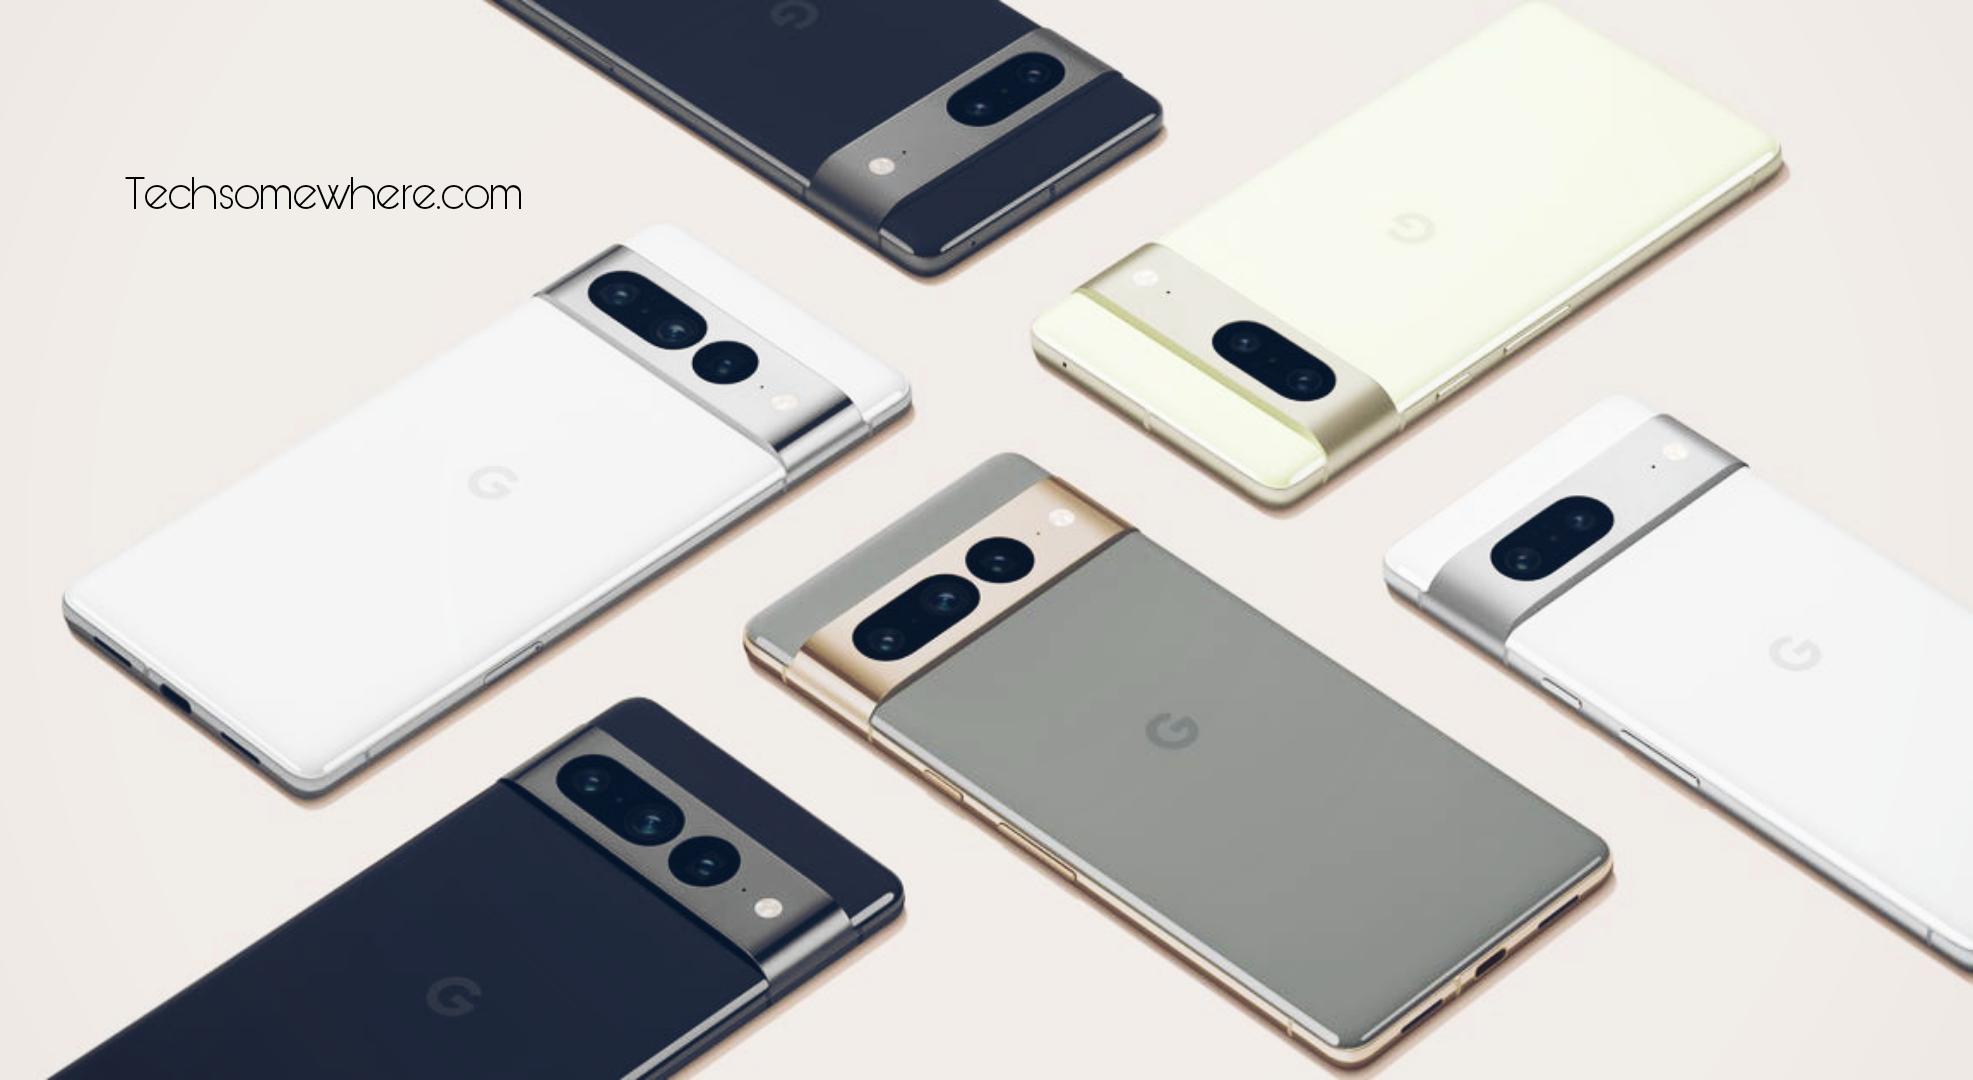 Presenting The New Google Pixel 7 Pro Interesting Features, Price, Rumor and Release Date!